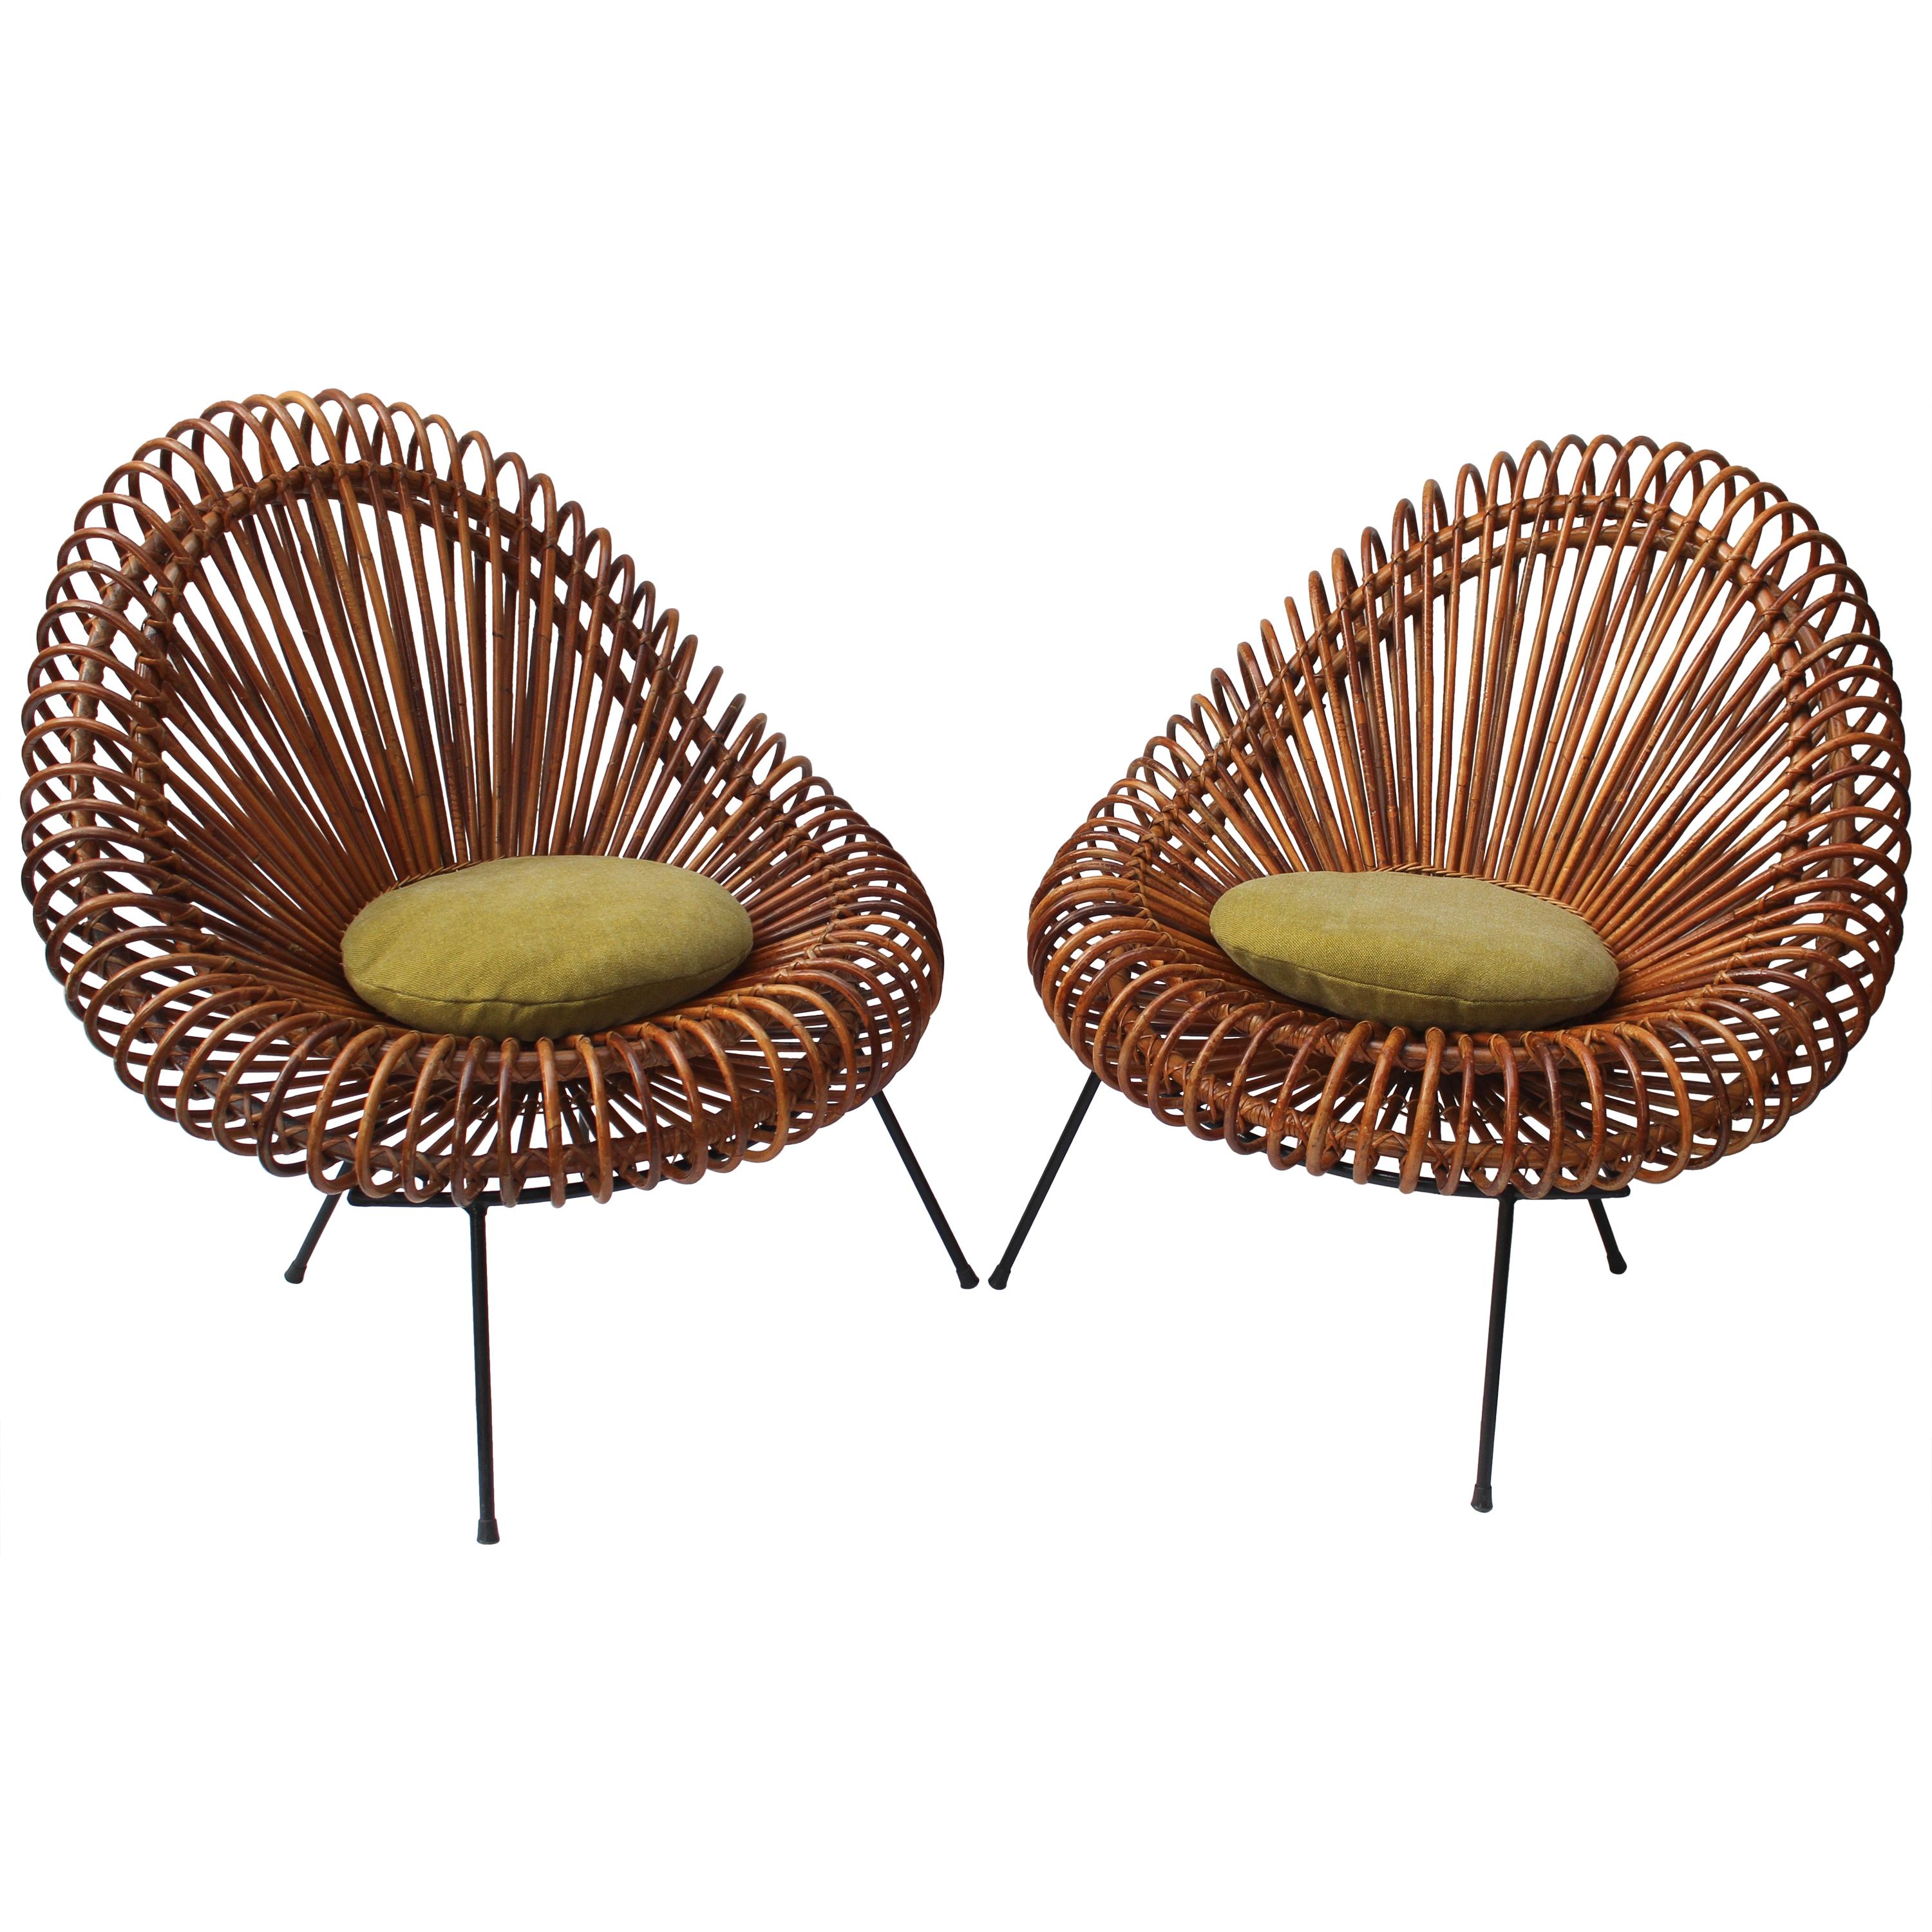 Pair of Rattan Chairs by Janine Abraham and Dirk Jan Rol